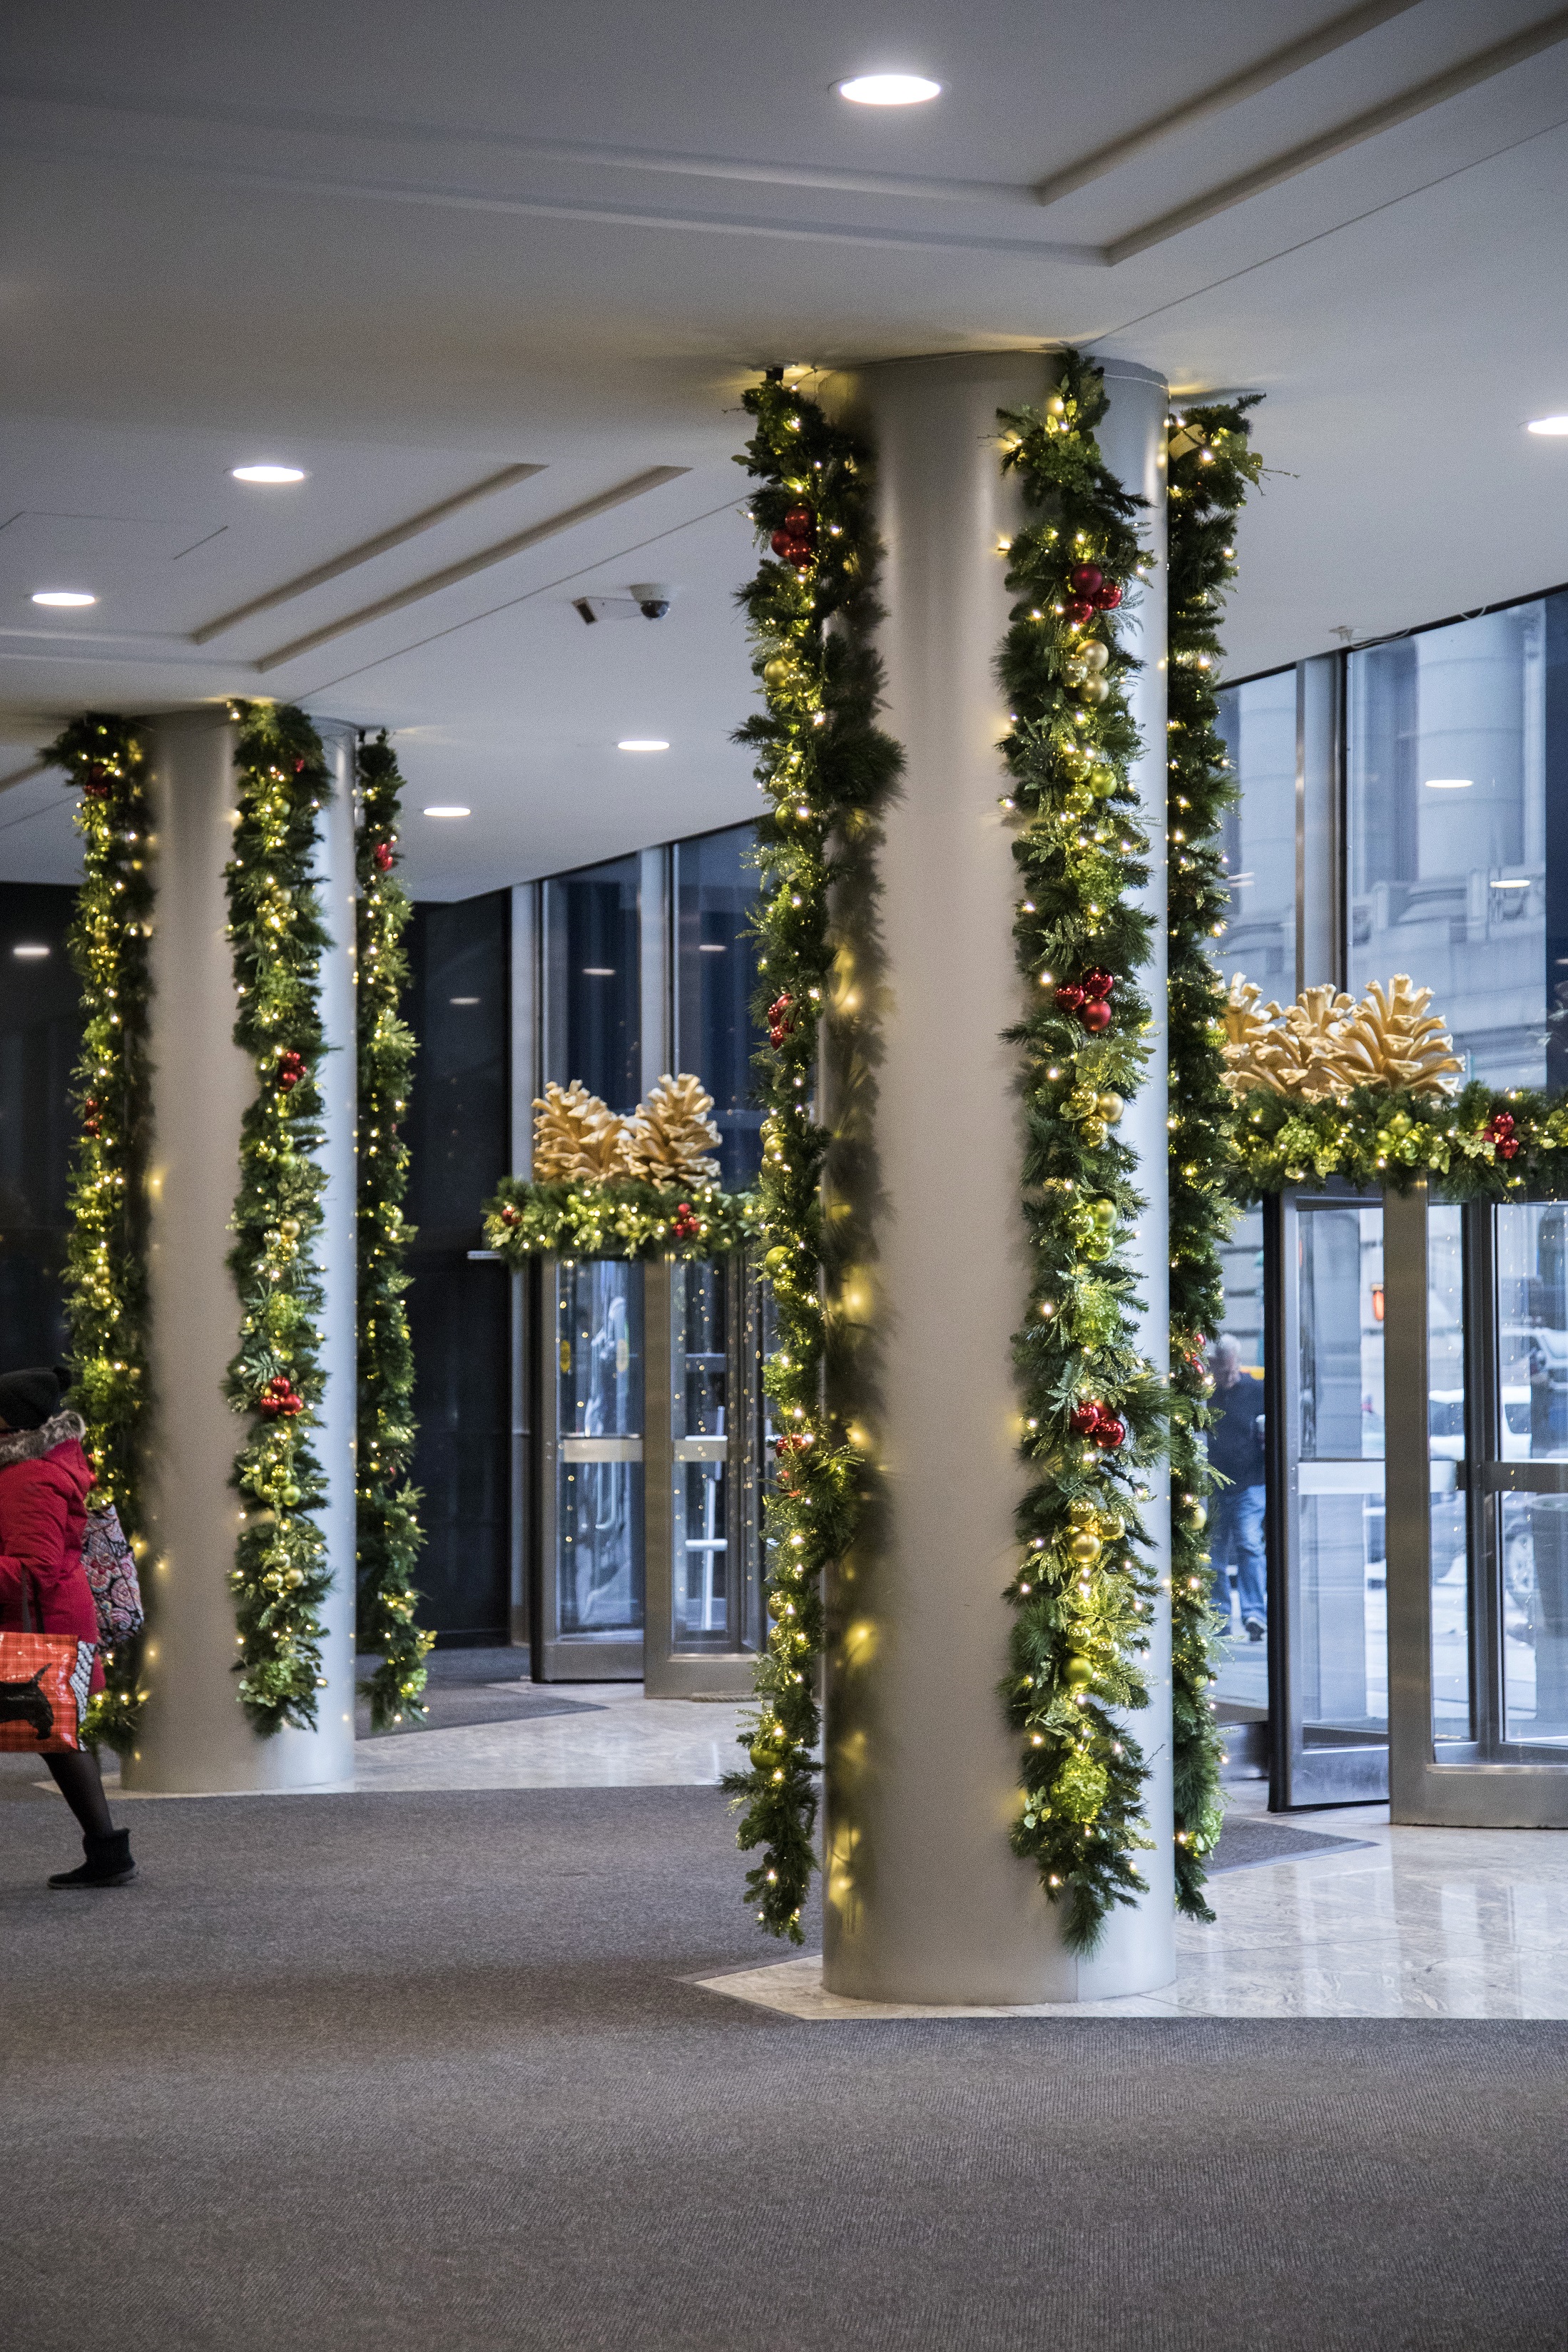 Garland elements gracefully frame this lobby, announcing distinct style to the surrounding landmark neighborhood.